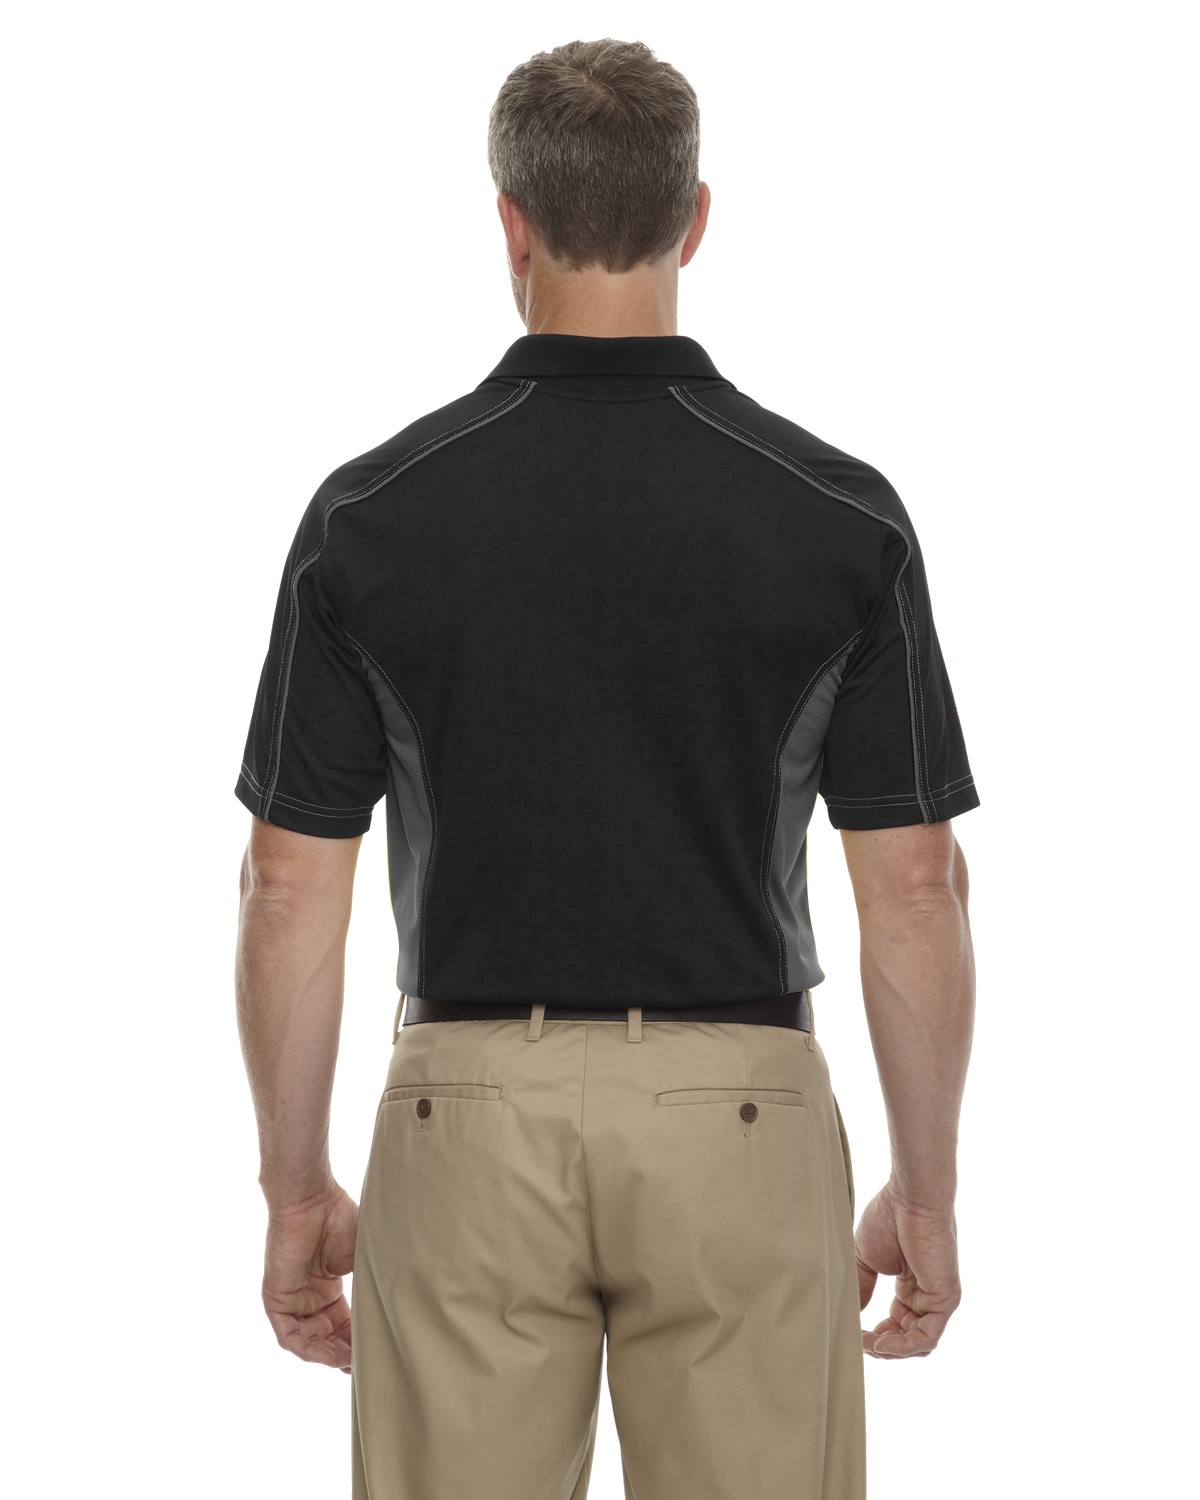 'Ash City - Extreme 85113T Men's Tall Eperformance Fuse Snag Protection Plus Colorblock Polo'